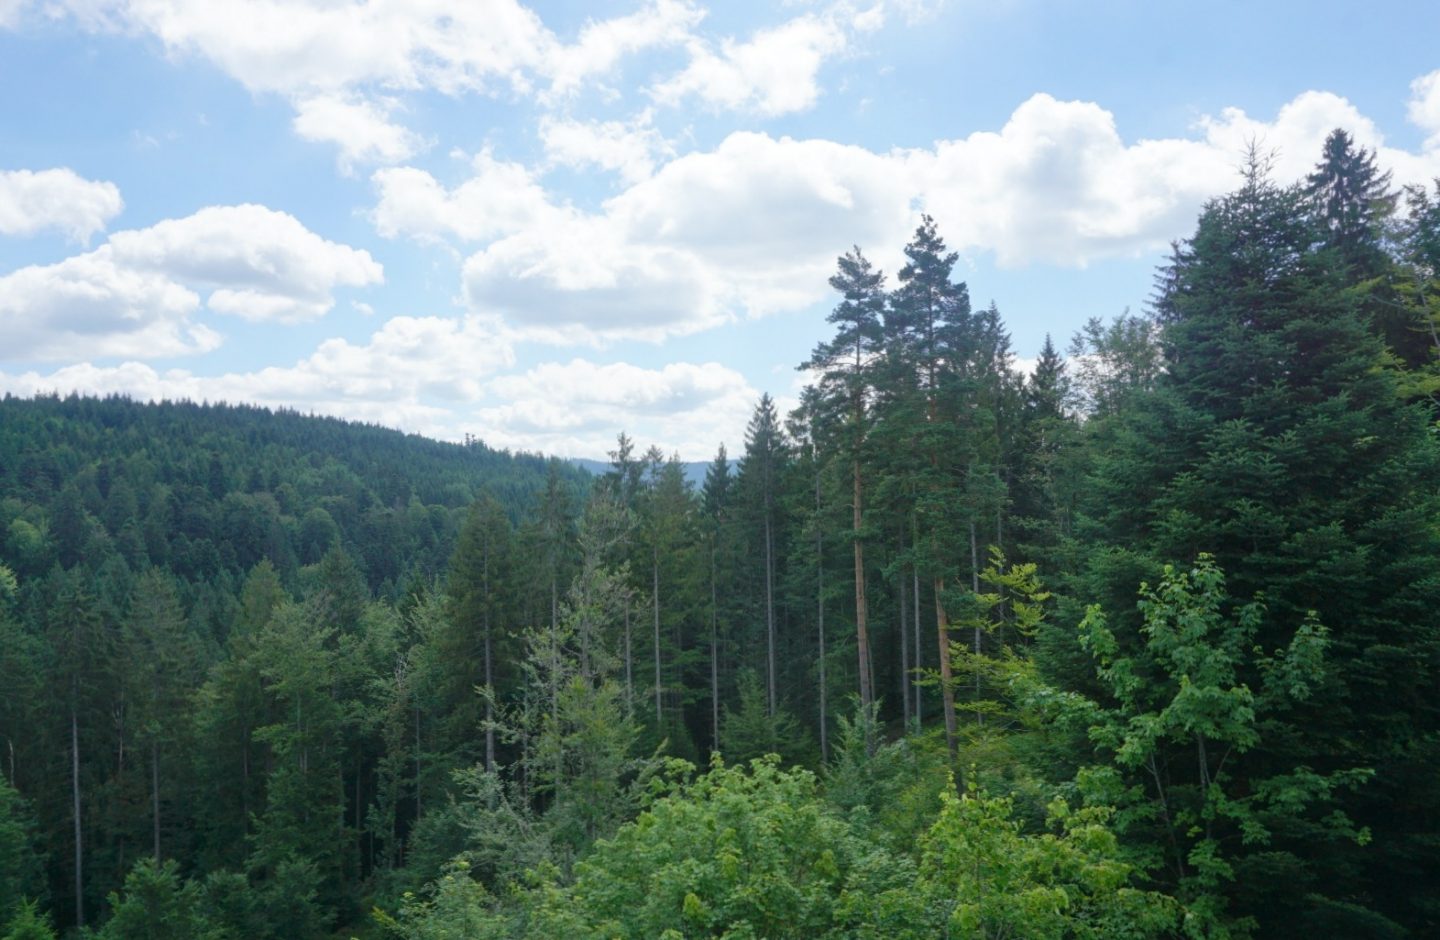 A view of the Black Forest, My Sunday Photos www.extraordinarychaos.com